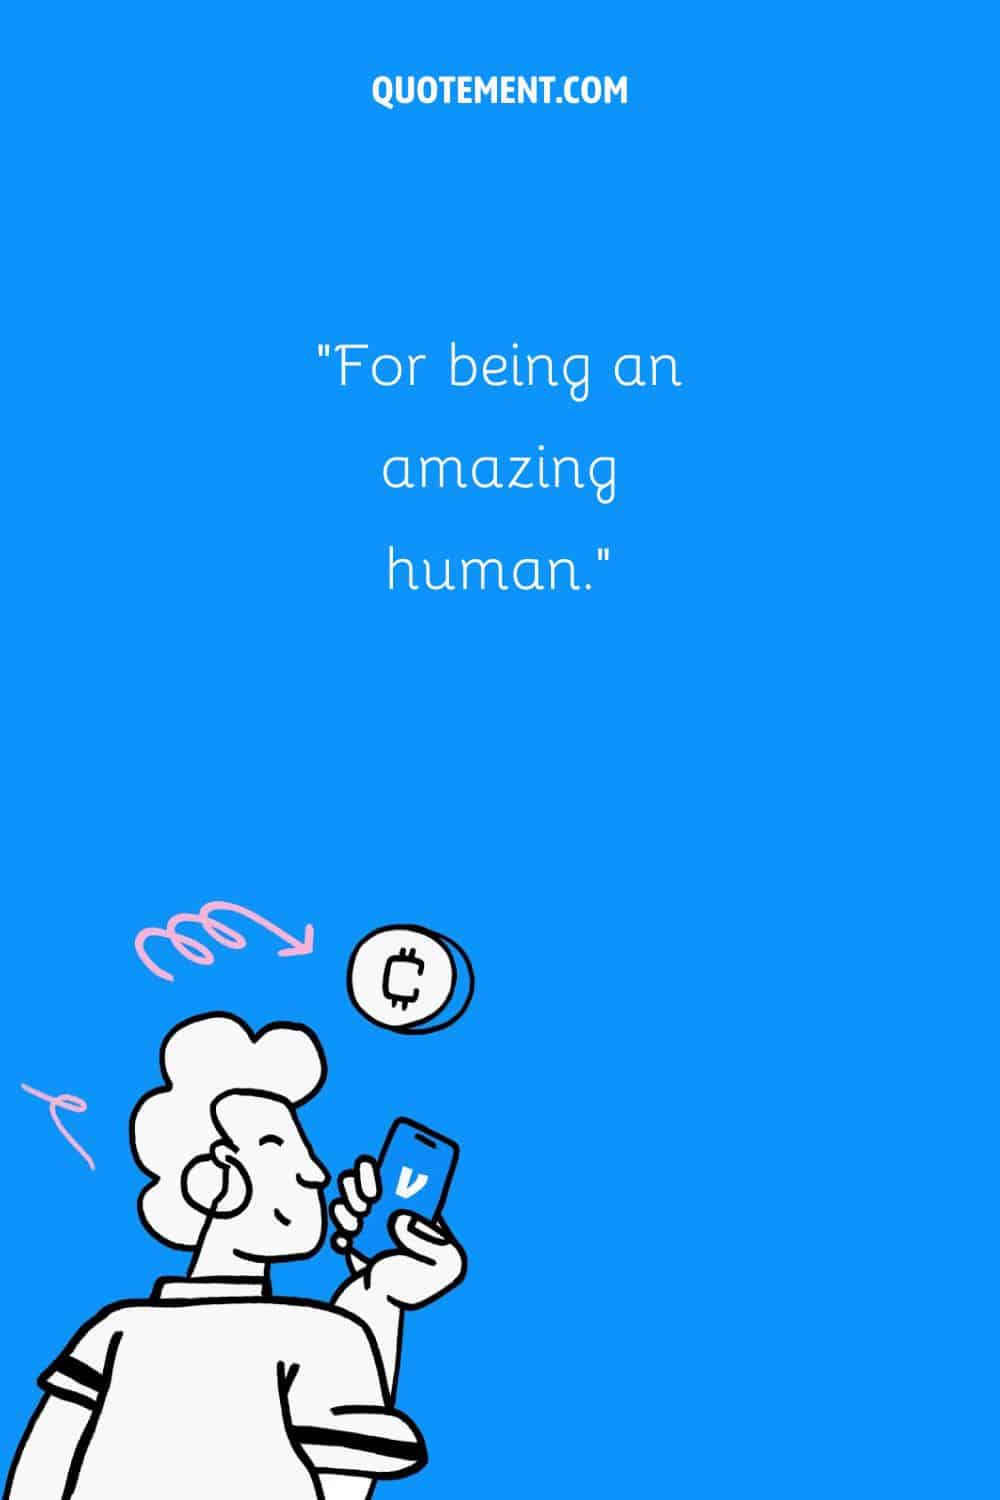 For being an amazing human